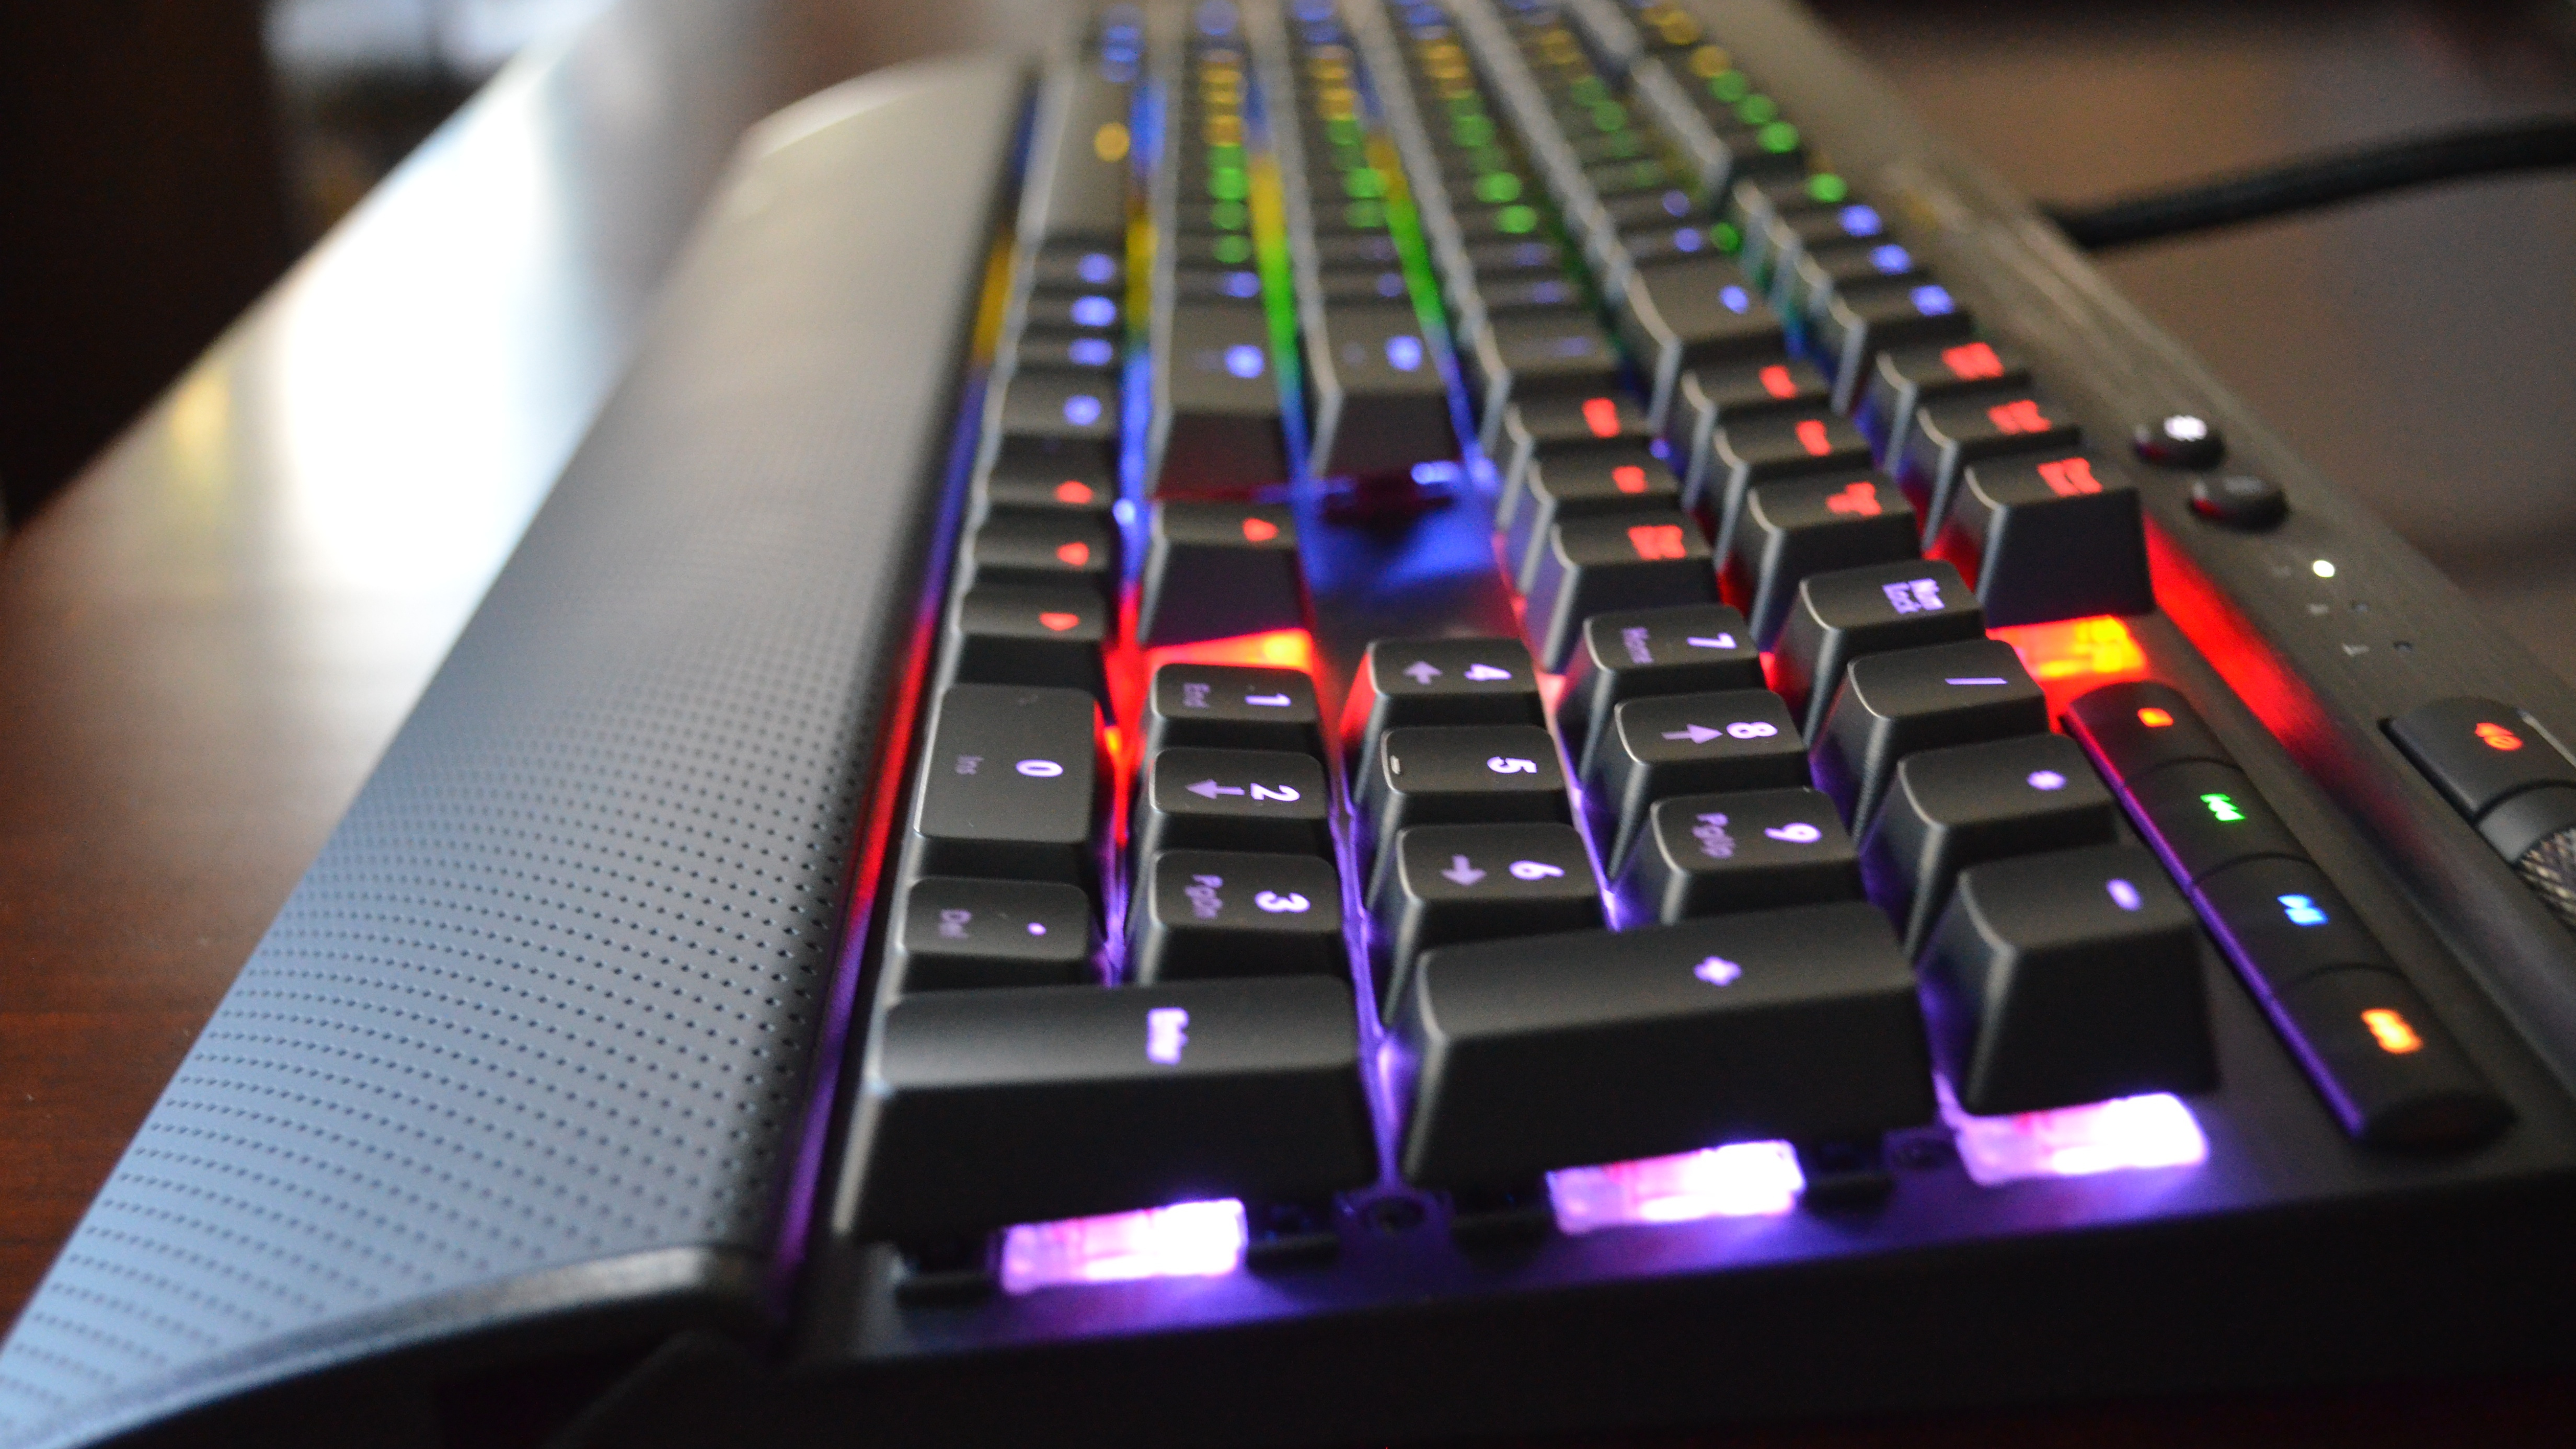 Buy this today: Corsair K70 Rapidfire, the best gaming keyboard